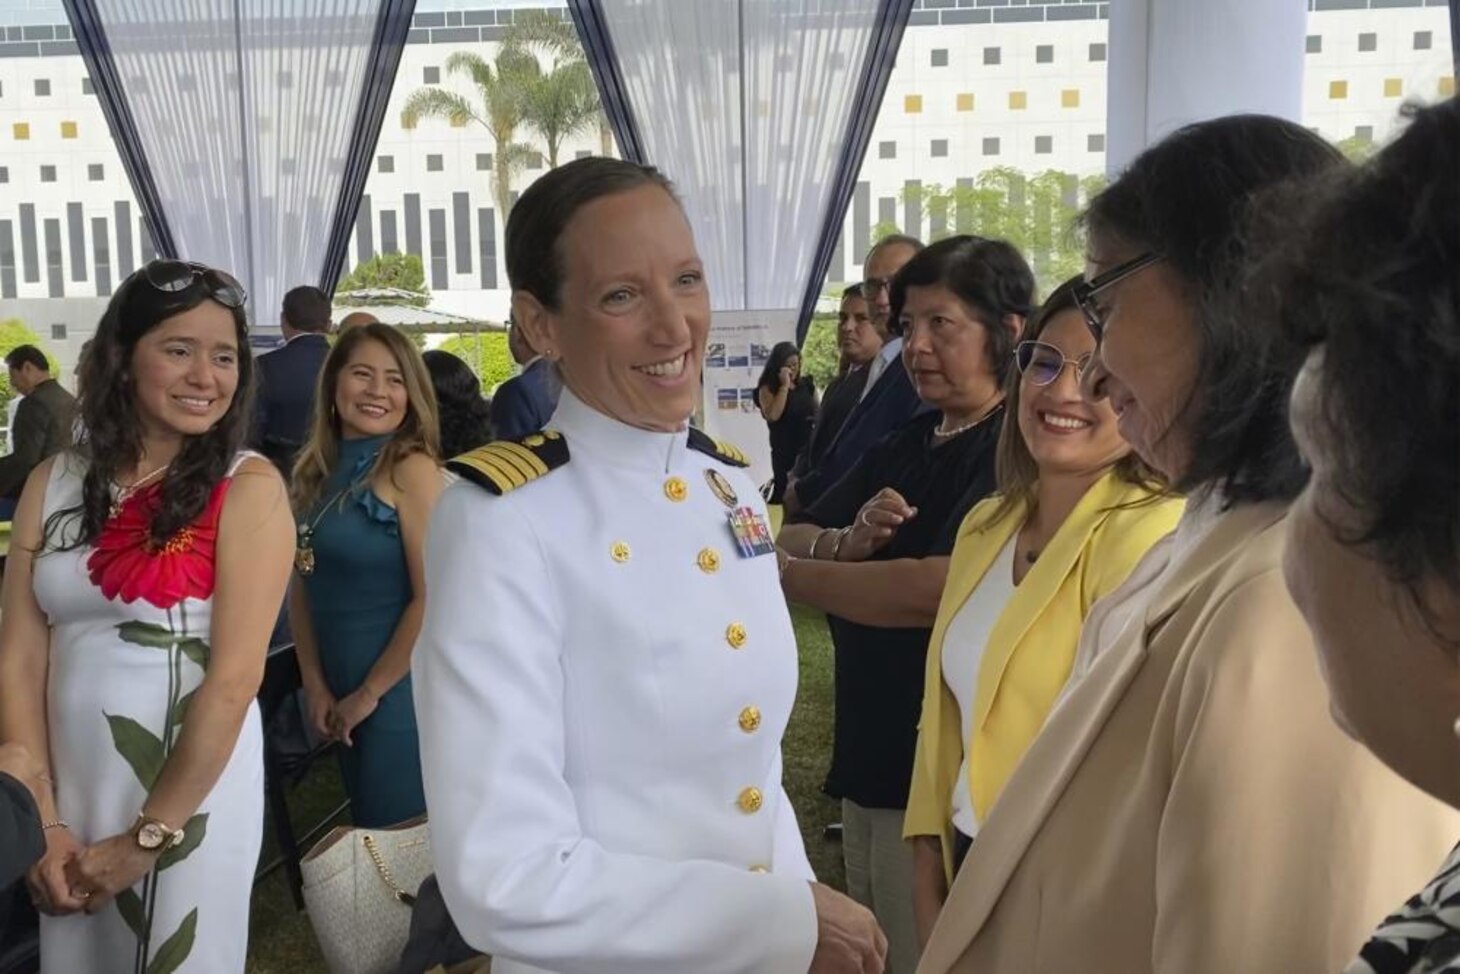 Smiling woman in white uniform chatting with women at ceremony